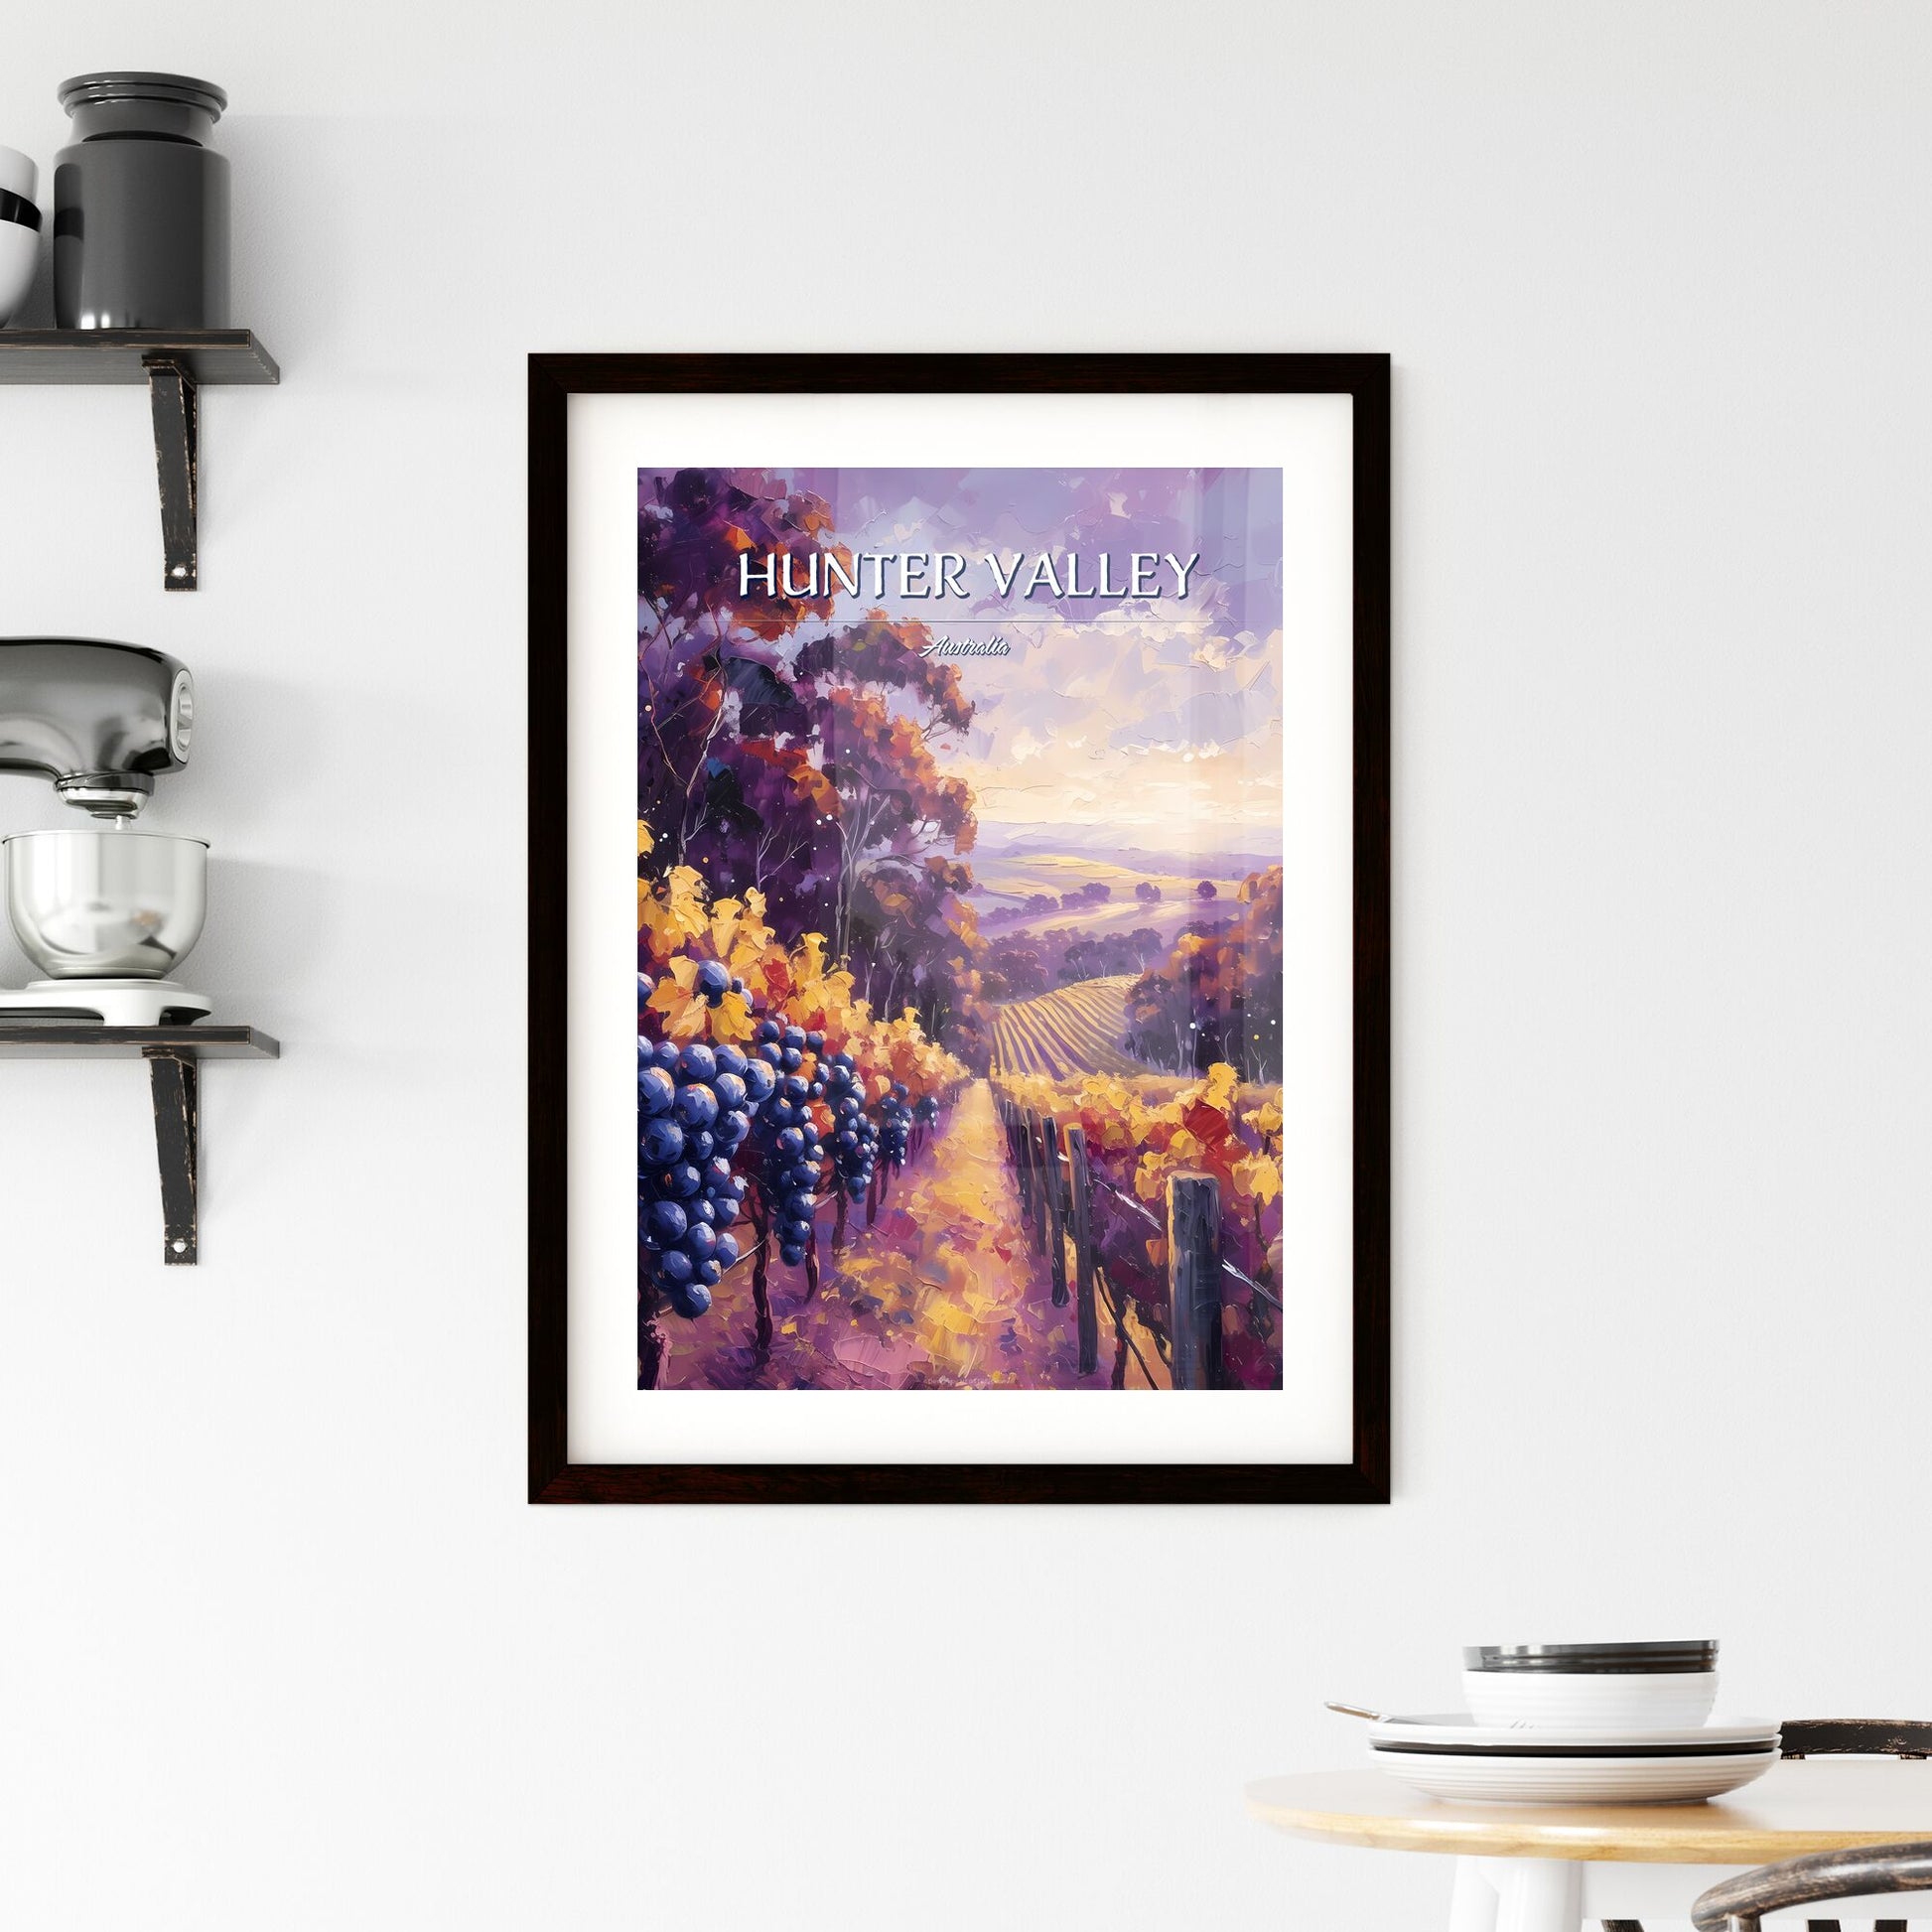 Hunter Valley, Australia - Art print of a view of a town with a body of water and mountains Default Title